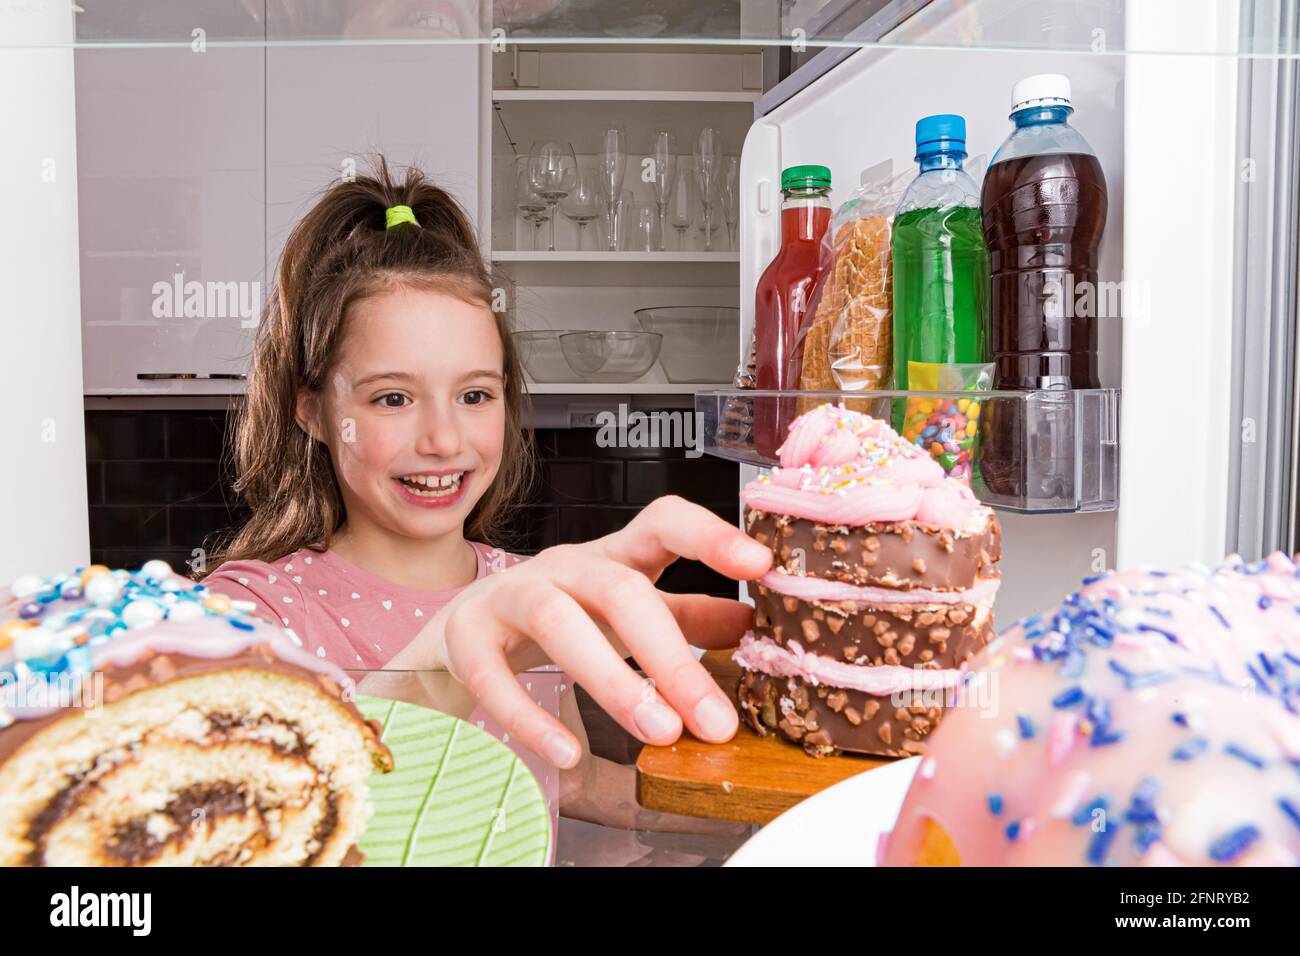 Open fridge from the inside, glass shelves with colourful desserts, cakes, cookies, candies, bottles of sugar drinks. Unhealthy eating, sugar food Stock Photo